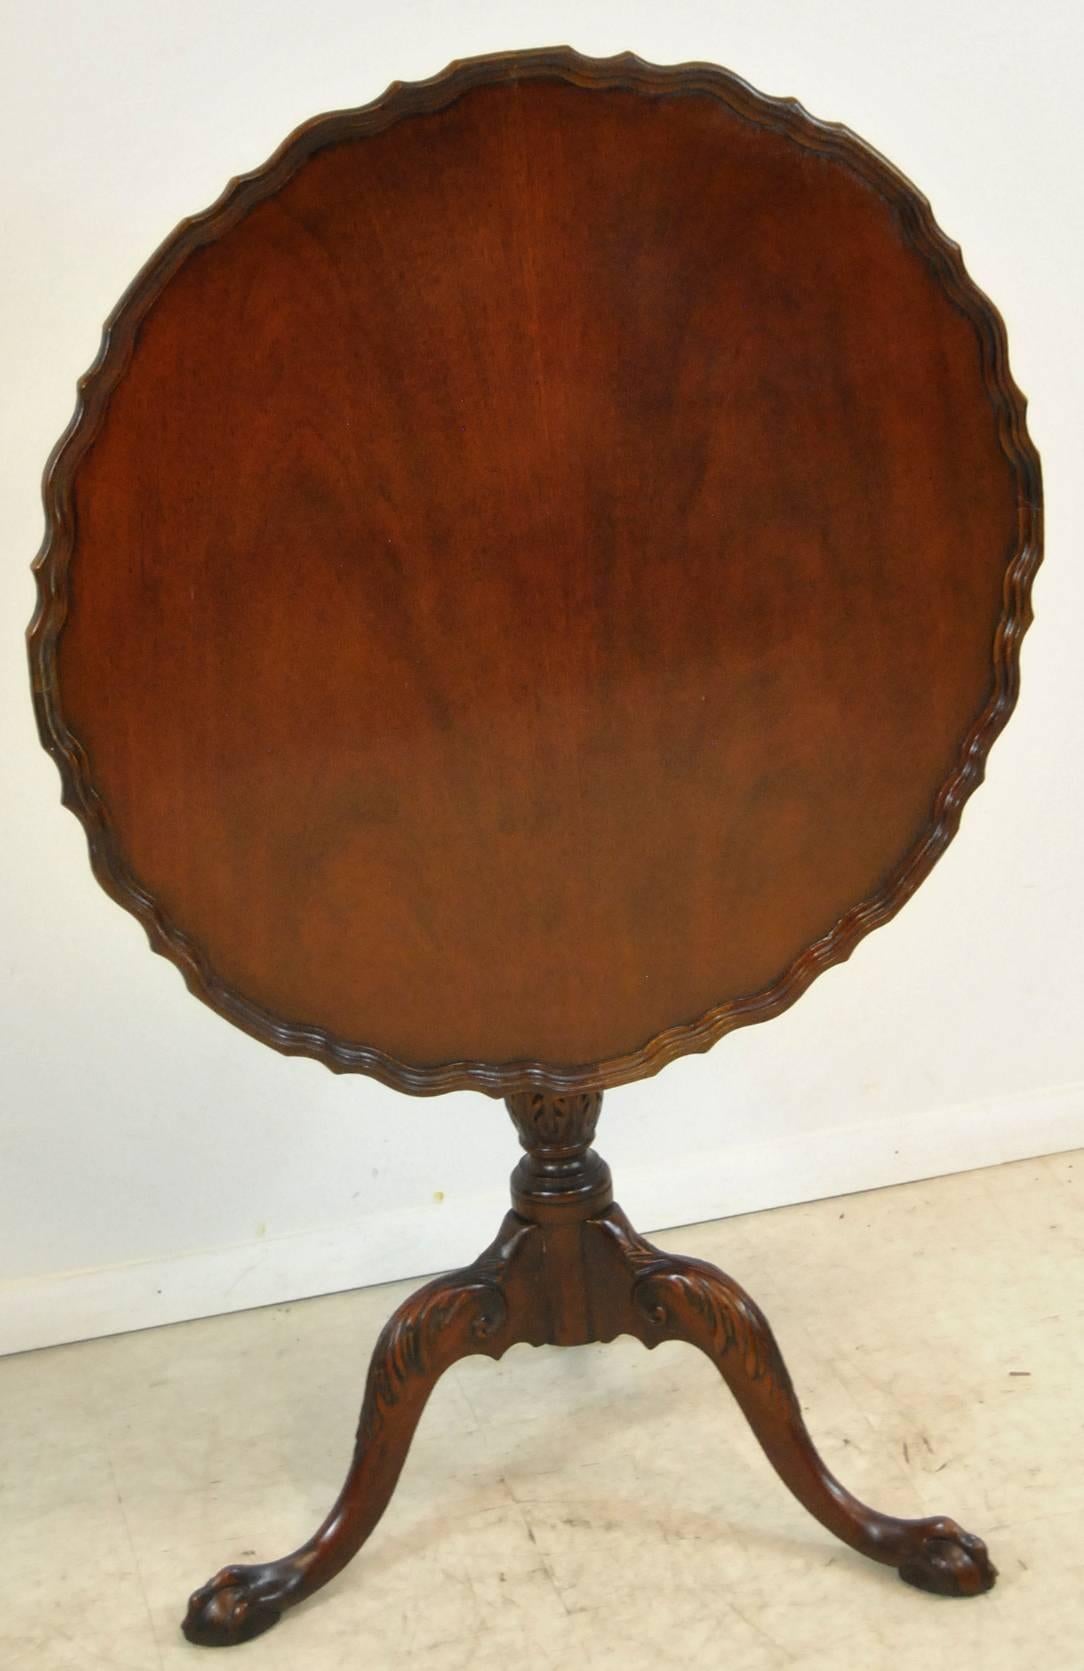 A beautiful tilt-top mahogany Chippendale style table by Baker Furniture, #7925. The table features a 30